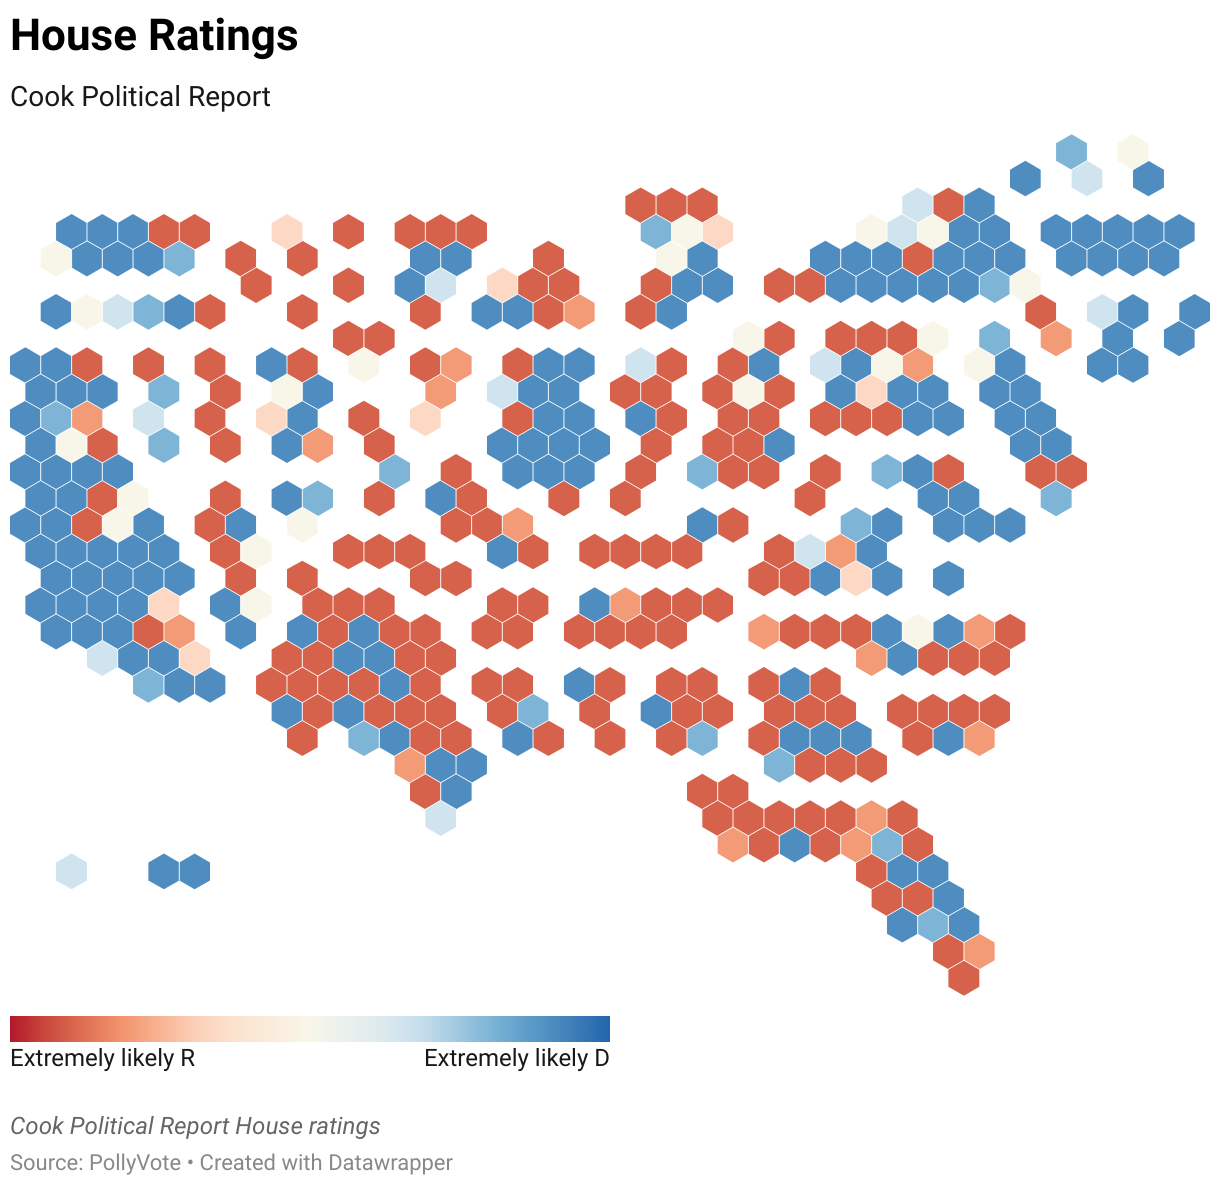 Cook Political Report House ratings for the 2024 U.S. House of Representatives Election